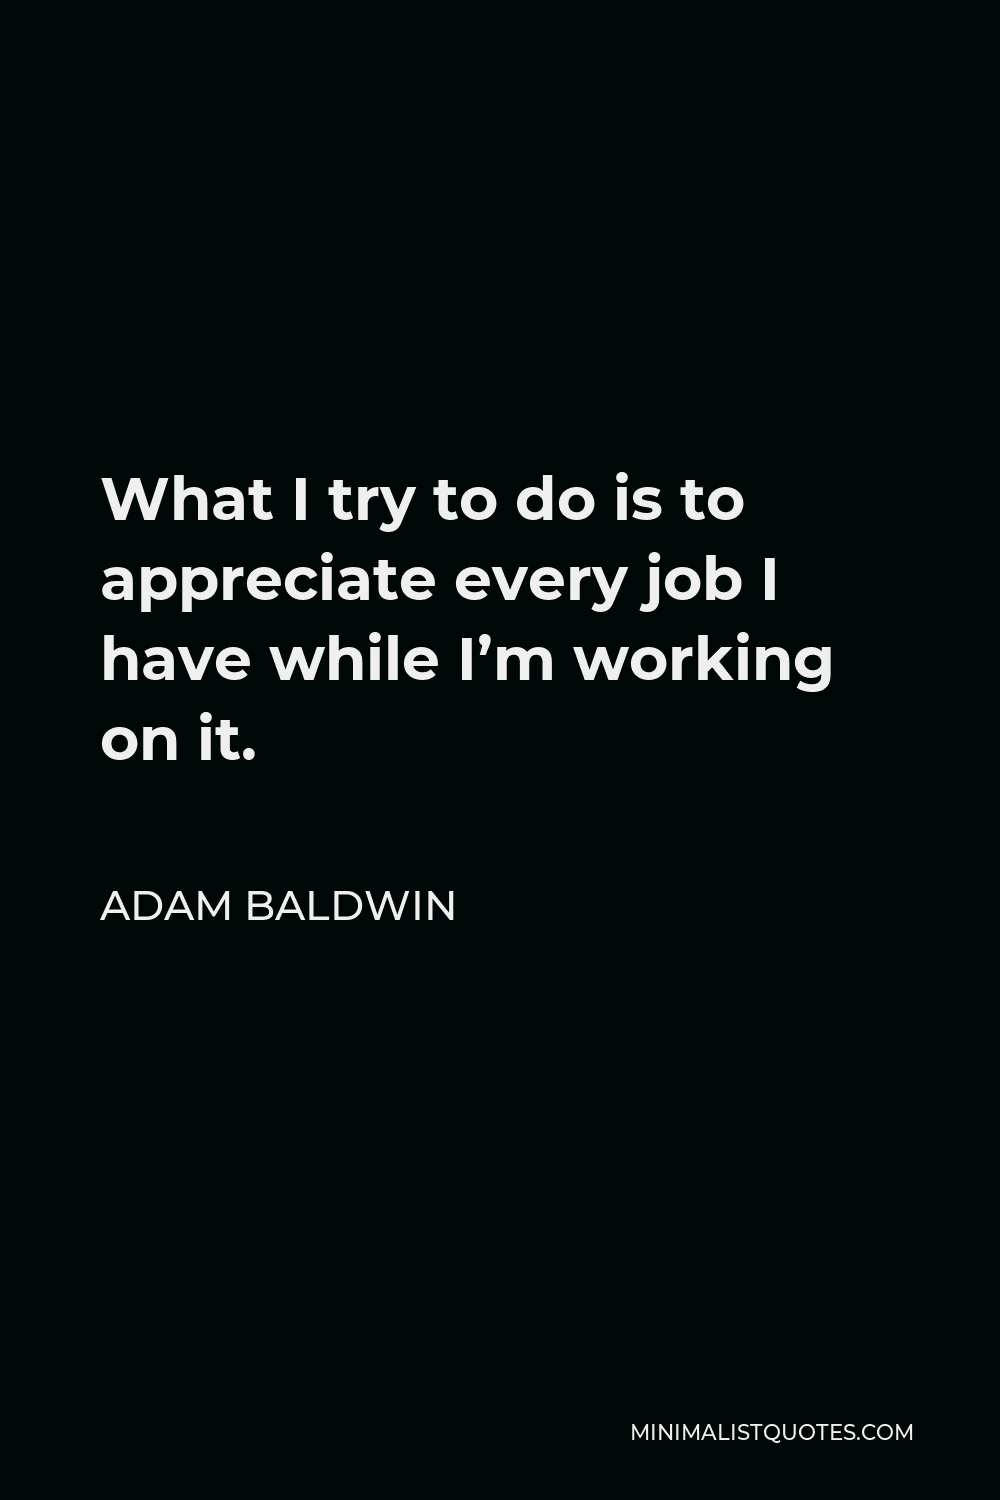 Adam Baldwin Quote - What I try to do is to appreciate every job I have while I’m working on it.